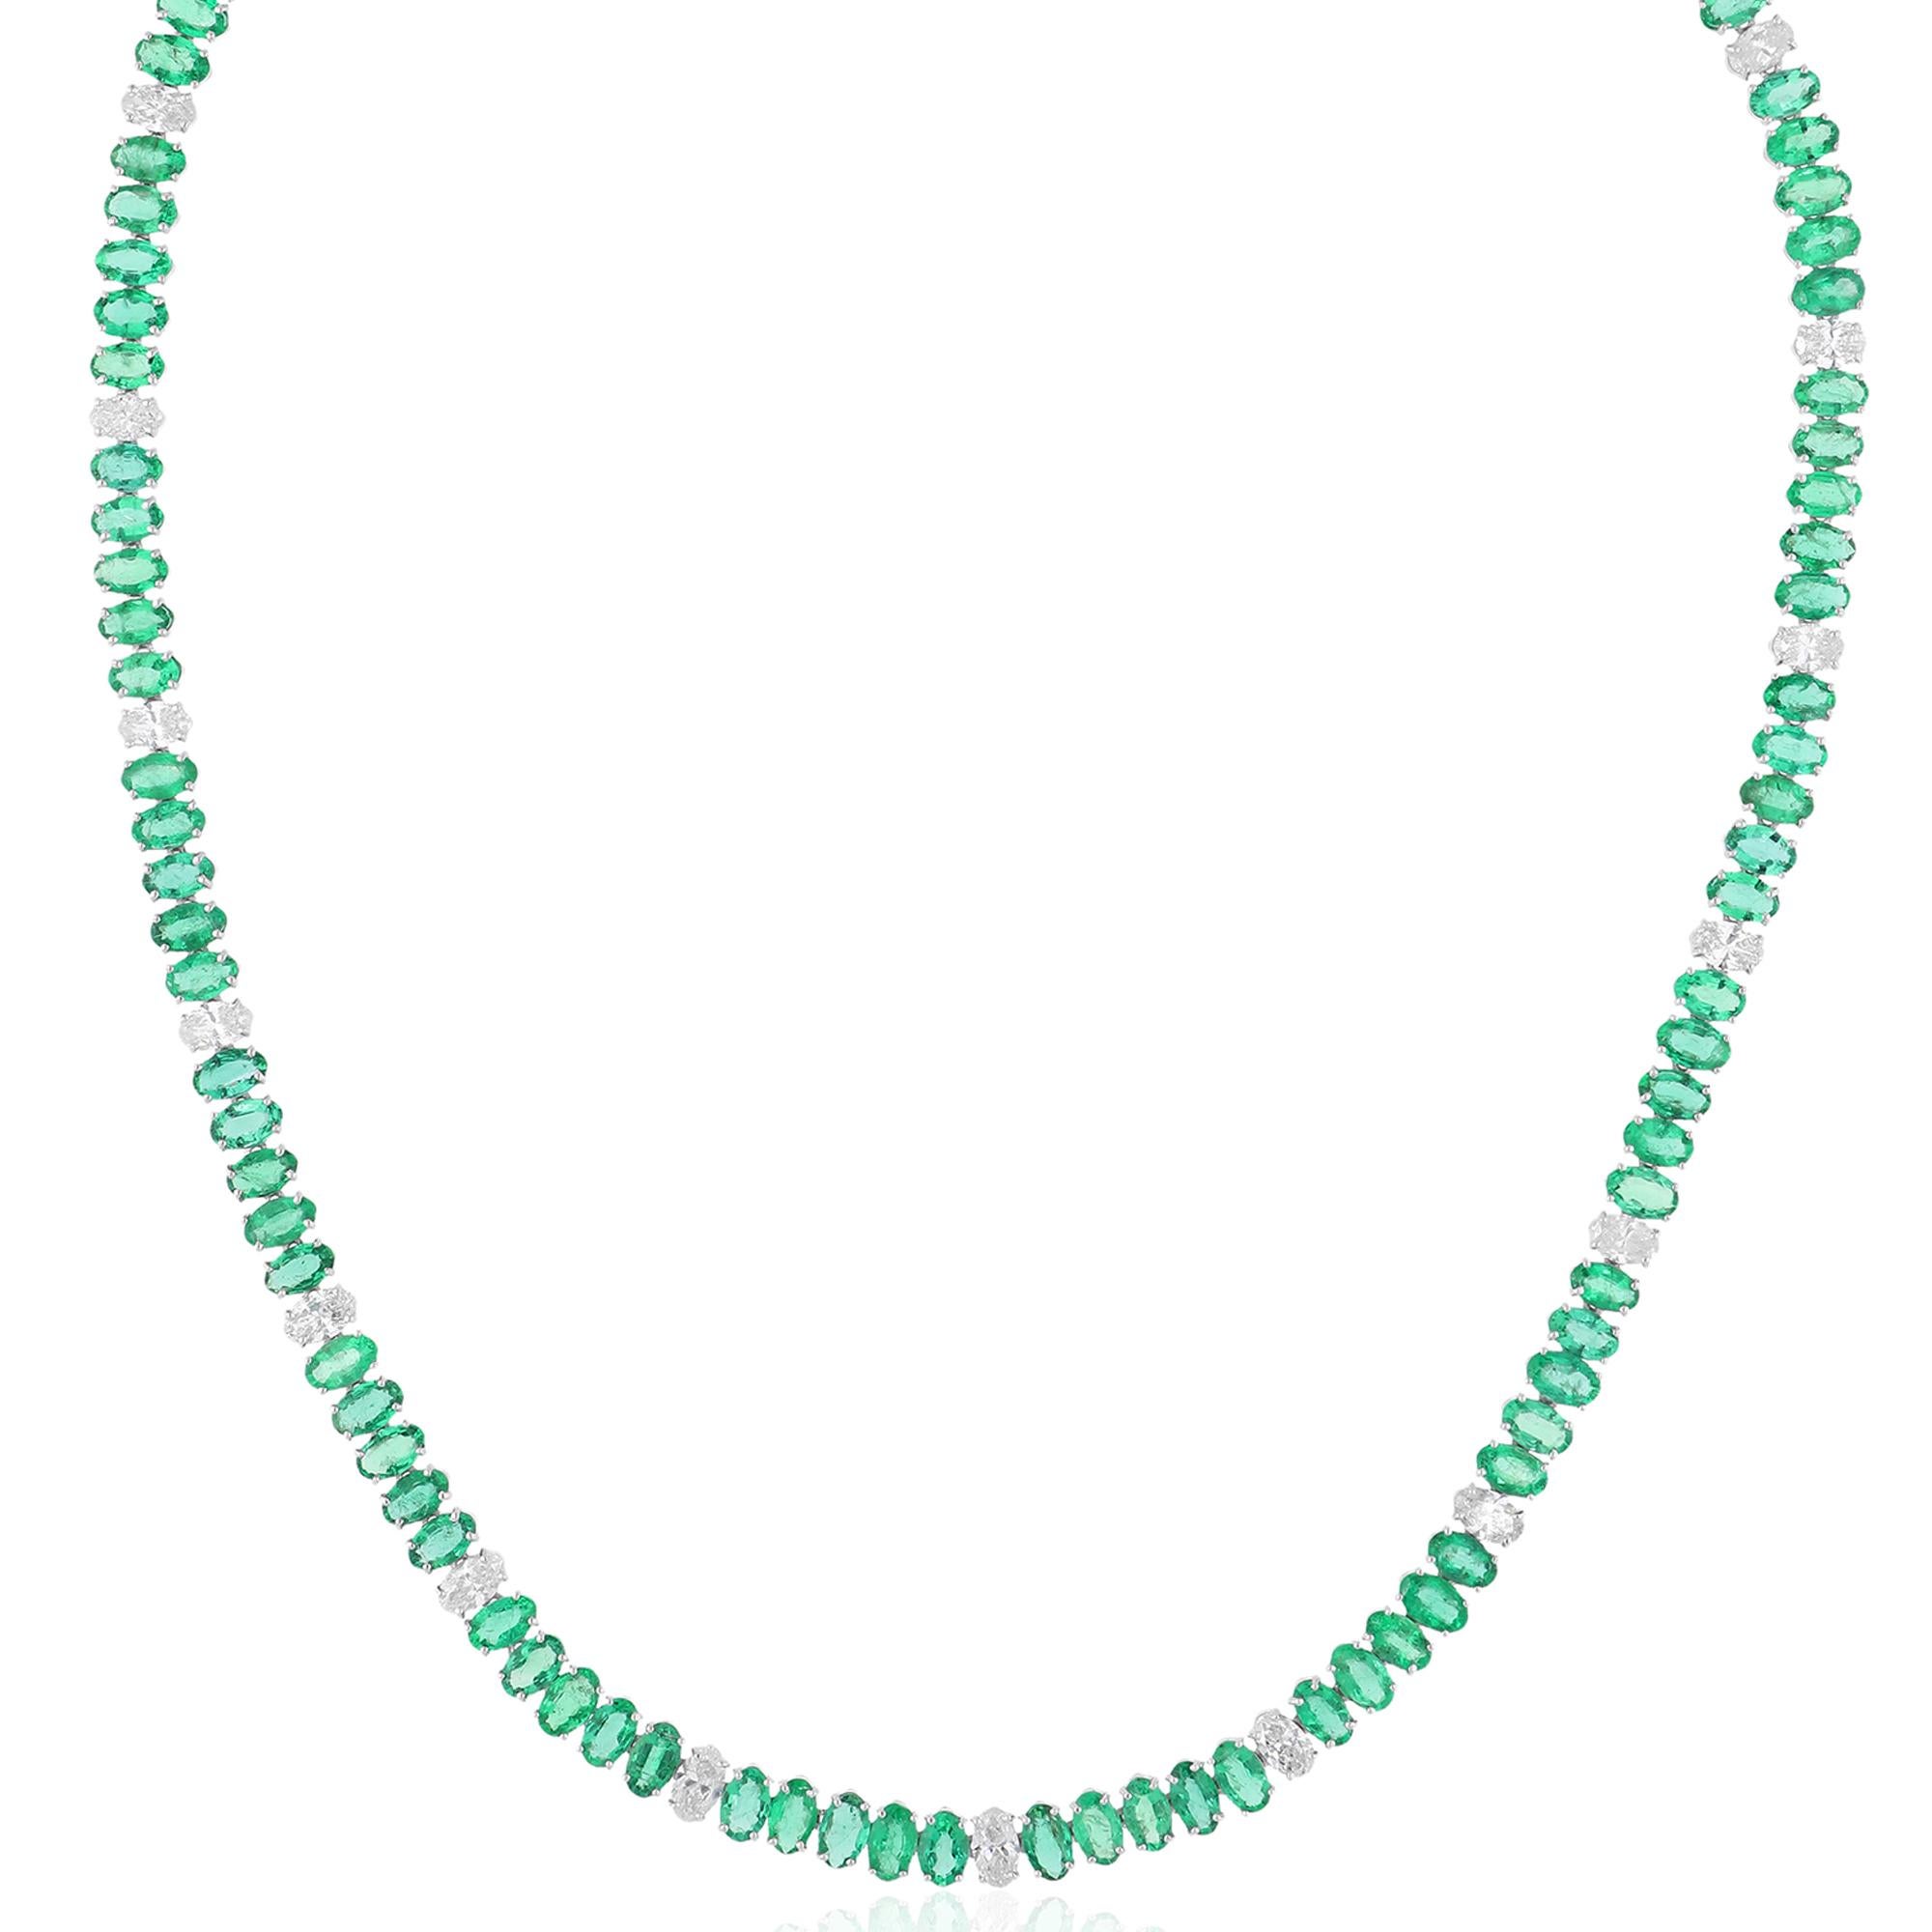 Introducing a stunning masterpiece of fine jewelry, behold this Oval Zambian Emerald Gemstone Necklace adorned with dazzling diamonds and expertly crafted in luxurious 14 karat white gold. Radiating with opulence and sophistication, this exquisite